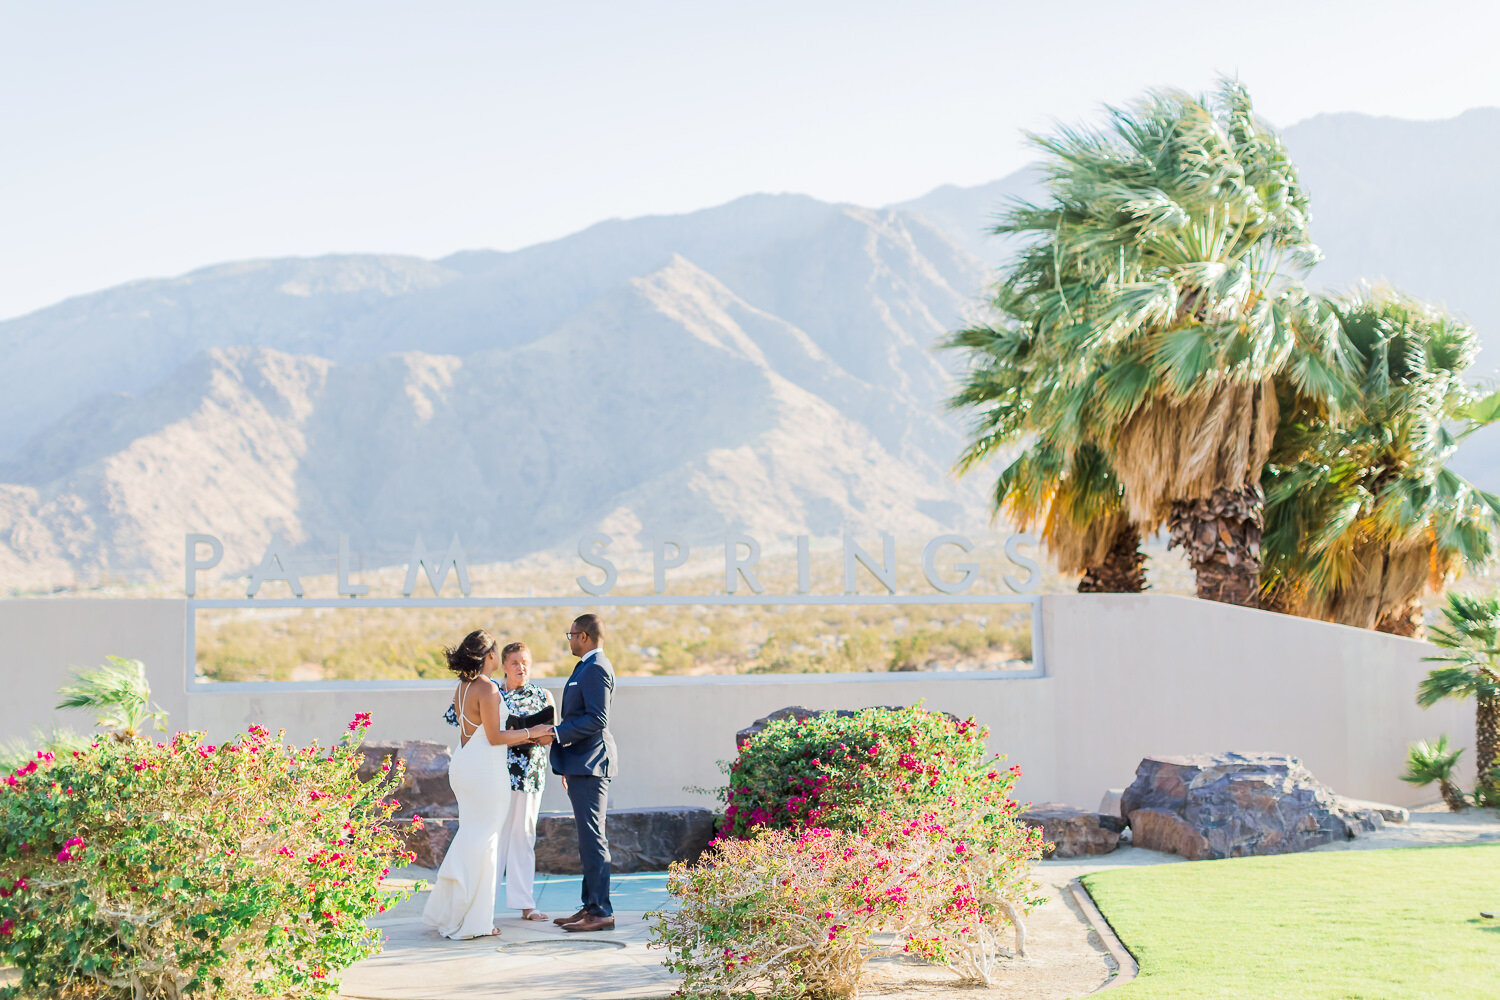 sevelle.elopement.palm.springs.sign.monocle.project-65.jpg